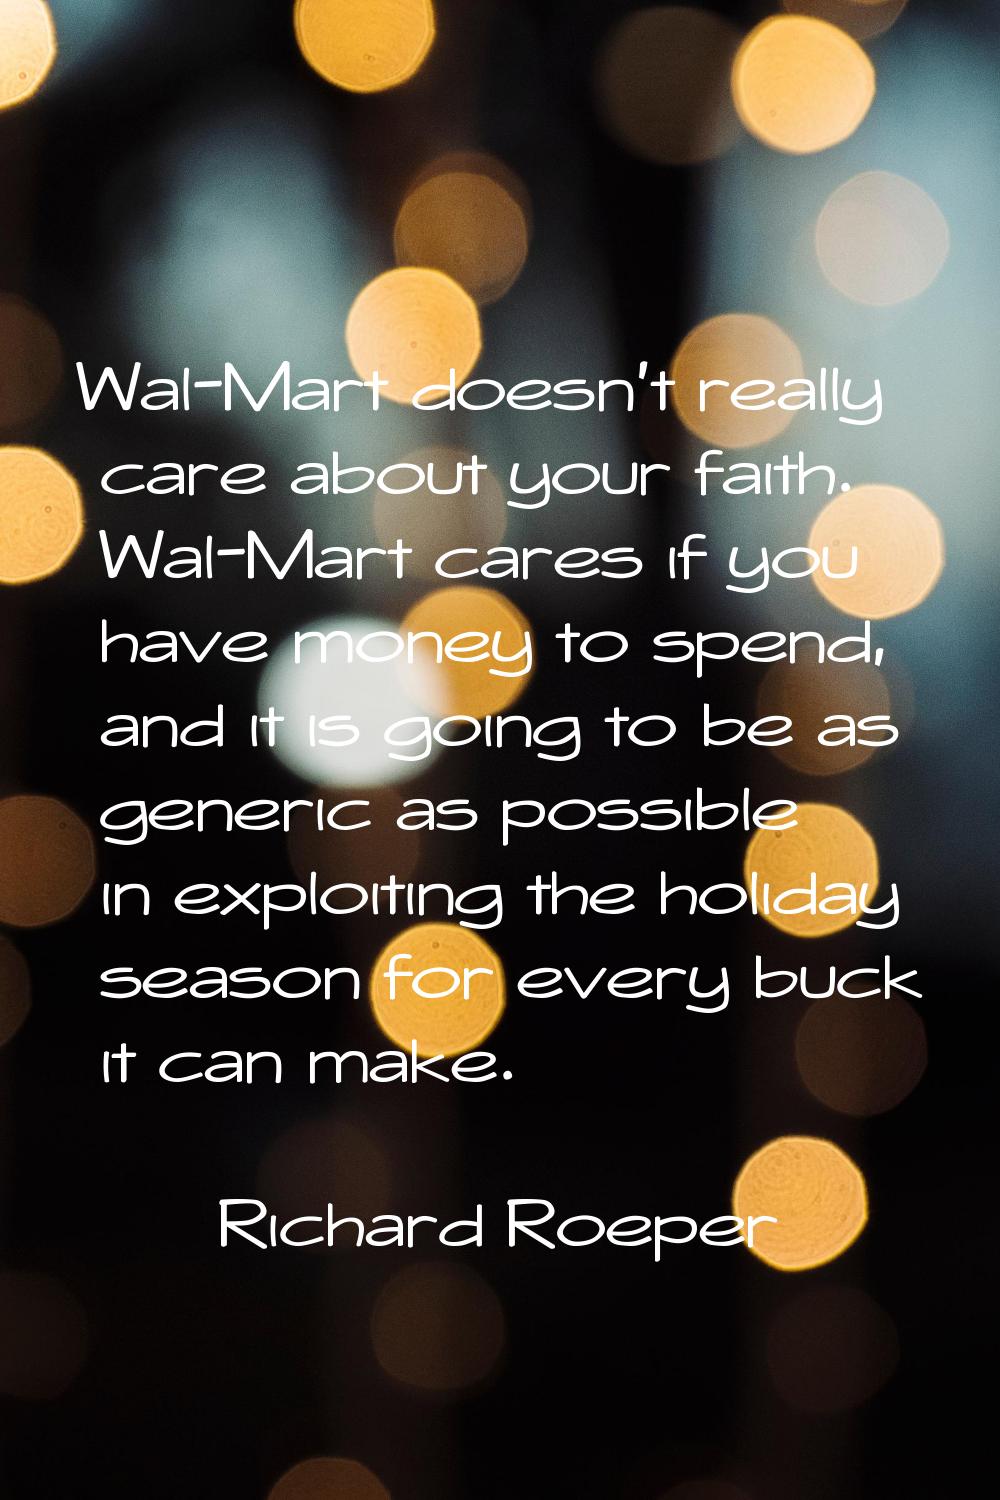 Wal-Mart doesn't really care about your faith. Wal-Mart cares if you have money to spend, and it is